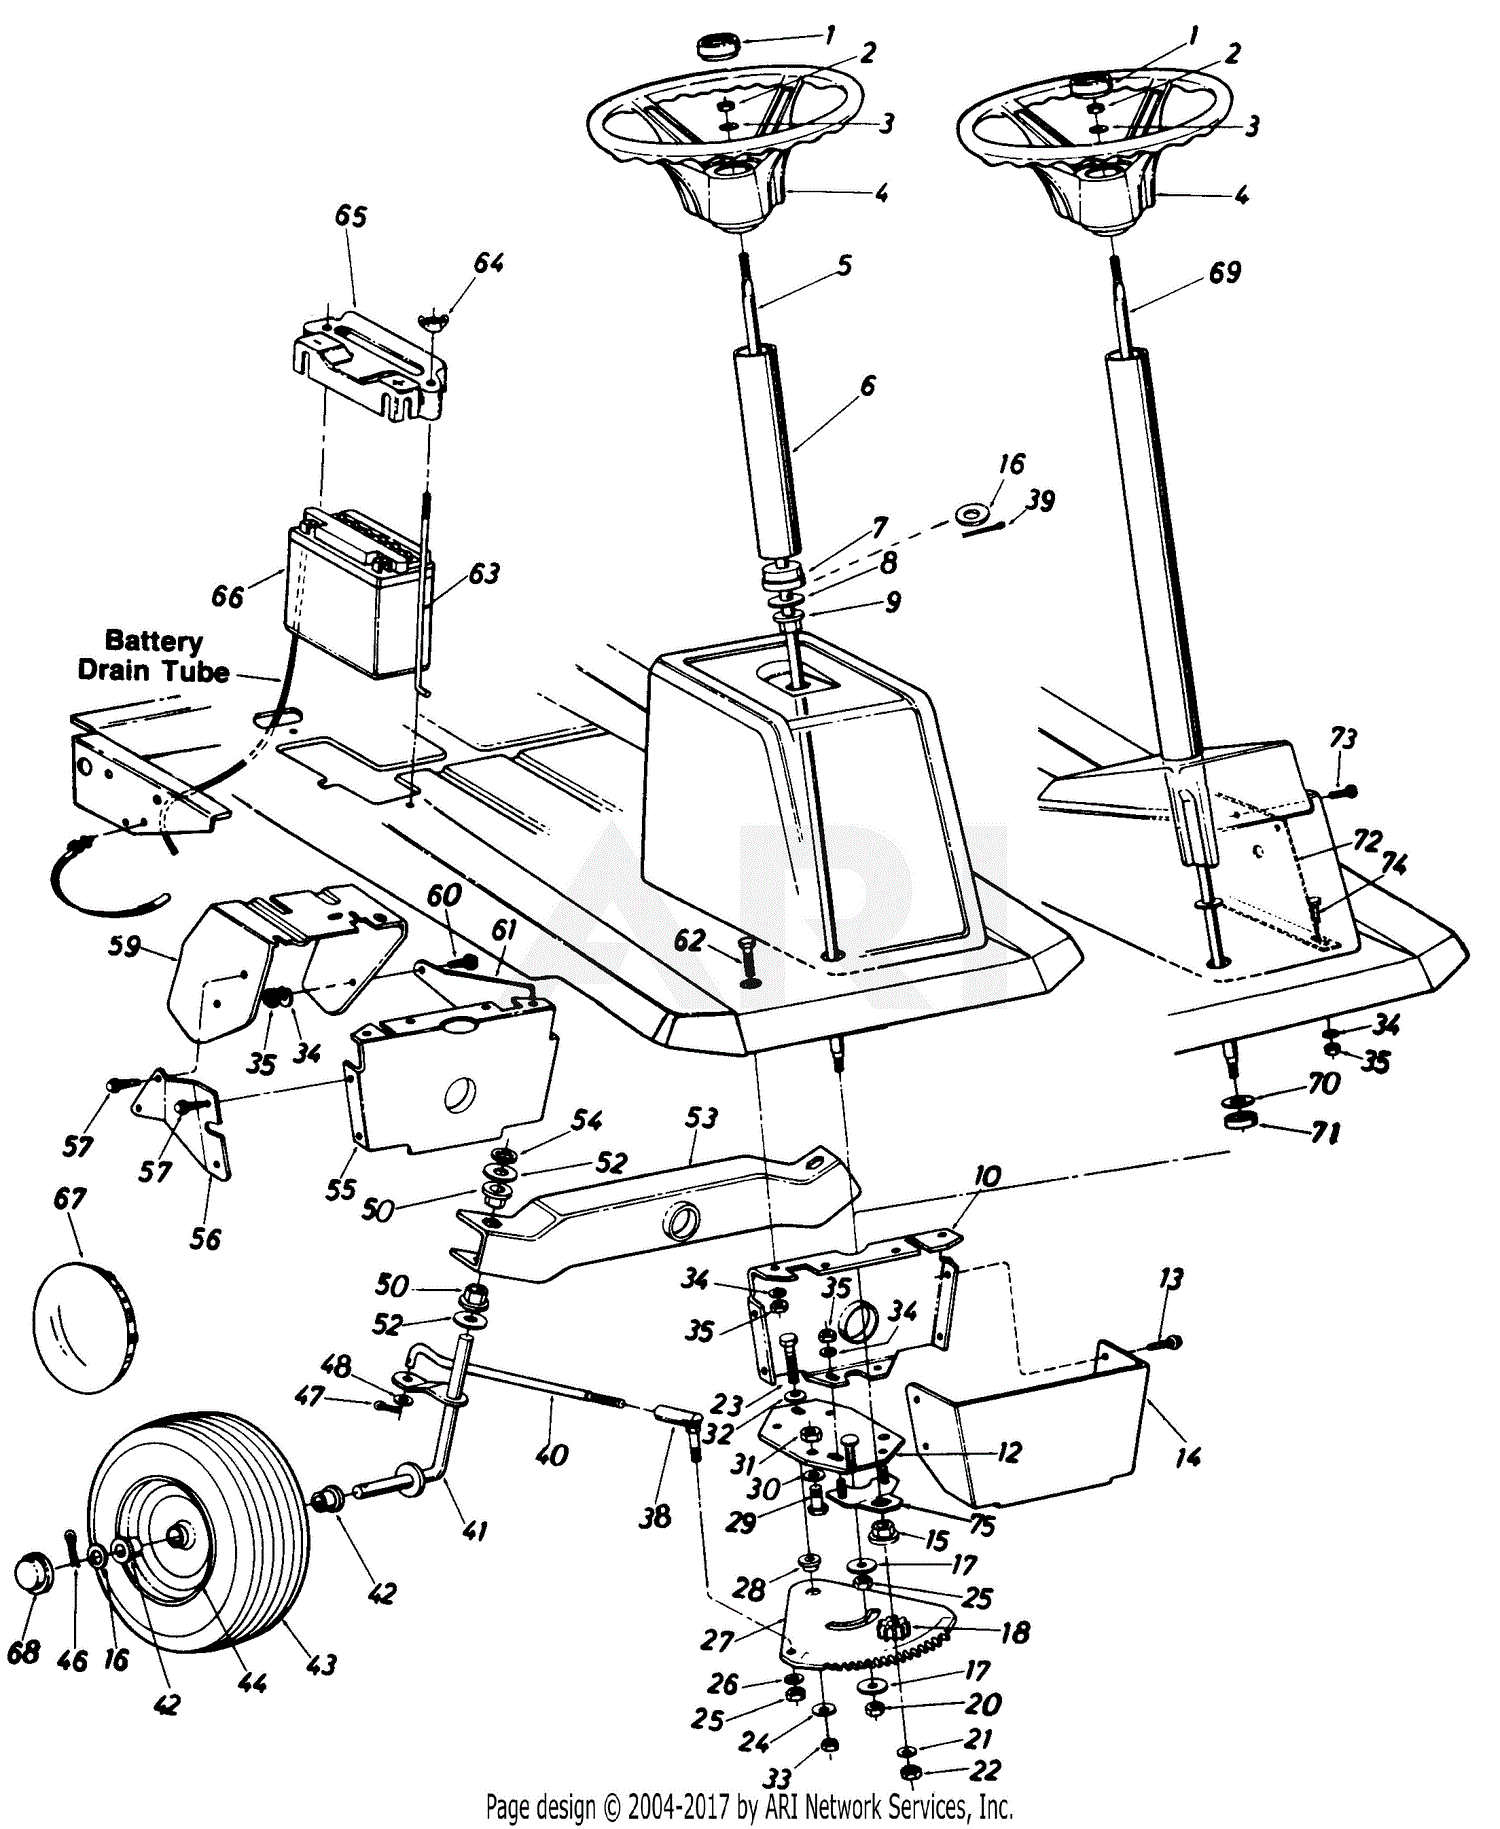 Mtd Lawn Tractor Parts Diagram MTD Front Engine Lawn Tractor Parts Sears Parts Direct